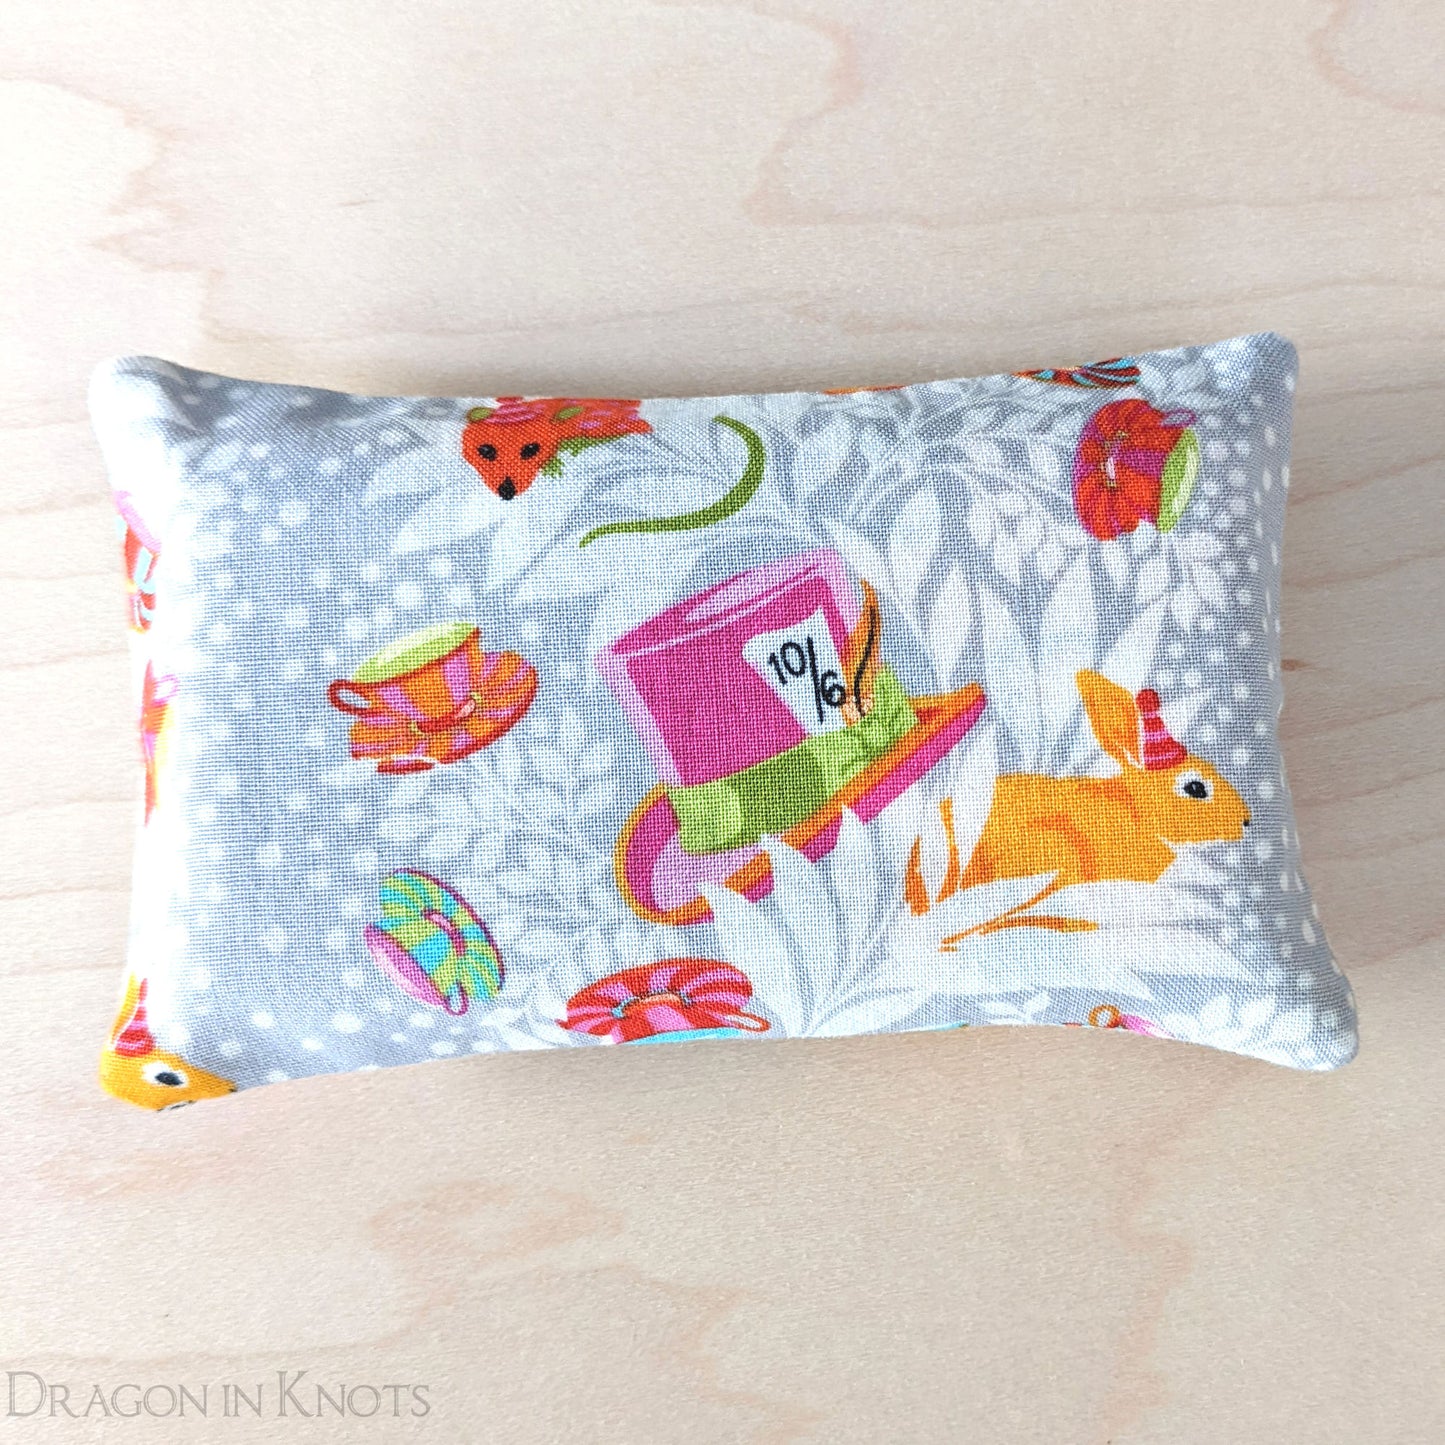 Mad Hatter's Tea Party - Pocket Tissue Holder - Dragon in Knots